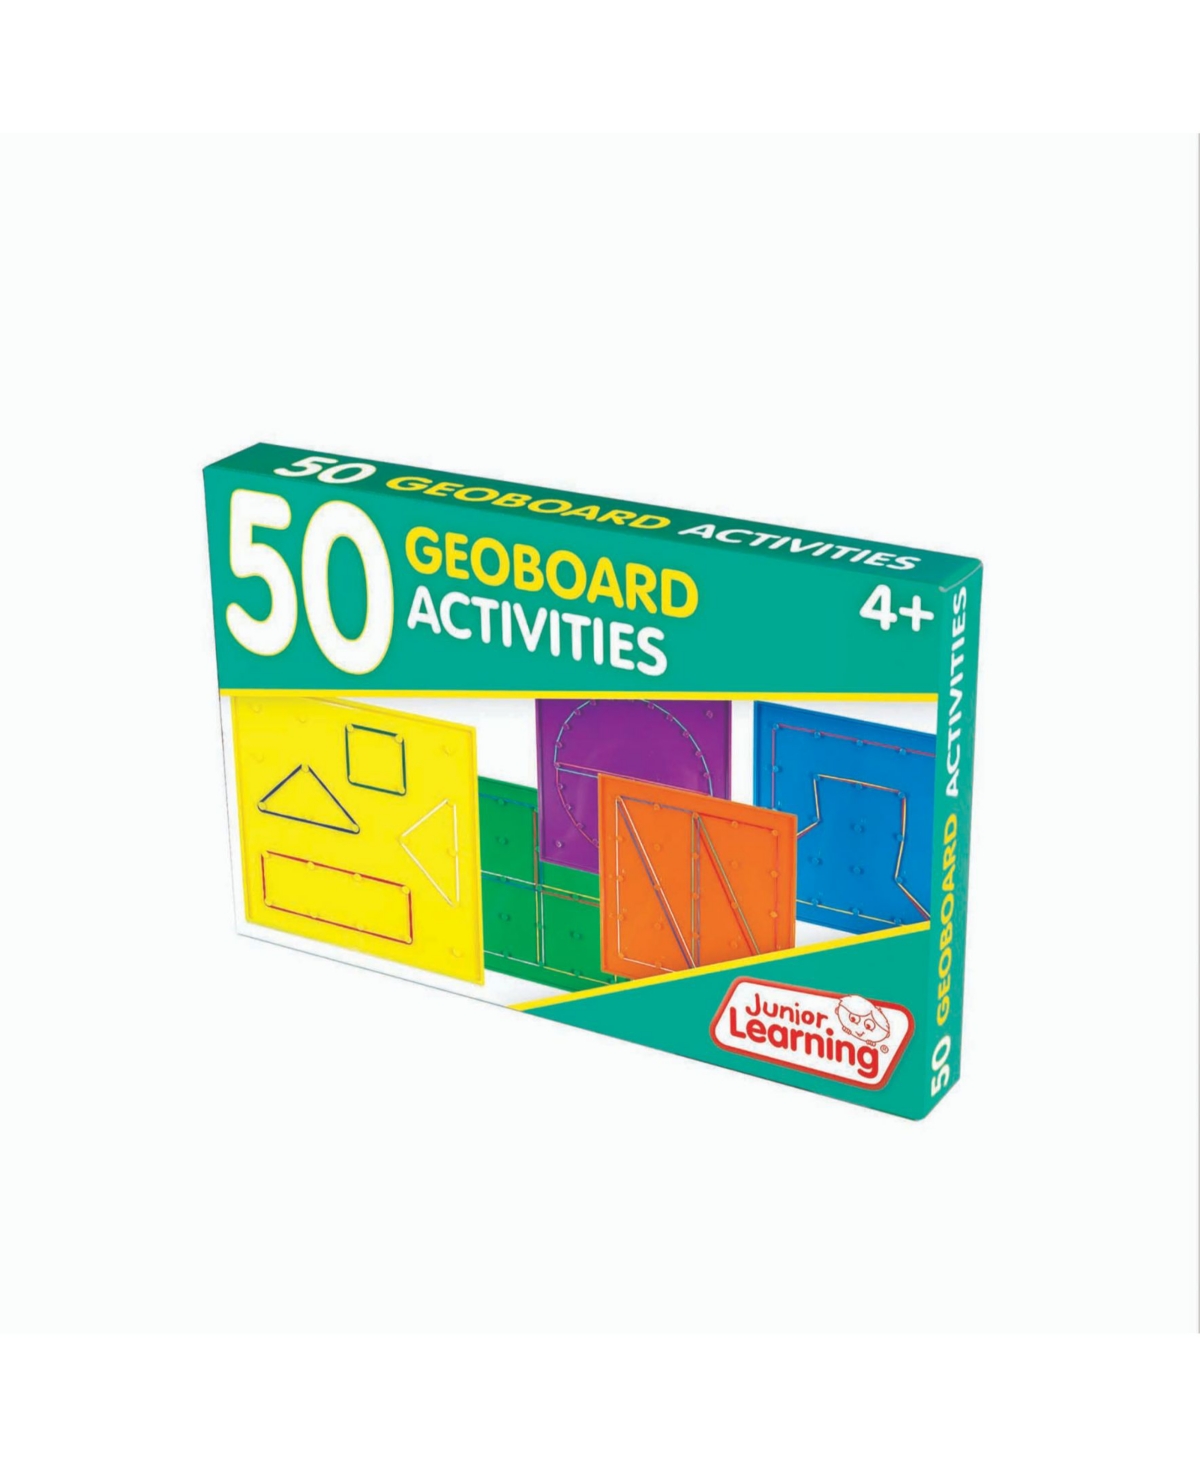 Redbox Junior Learning 50 Geoboard Educational Activity Cards For Math Skills In Open Misce